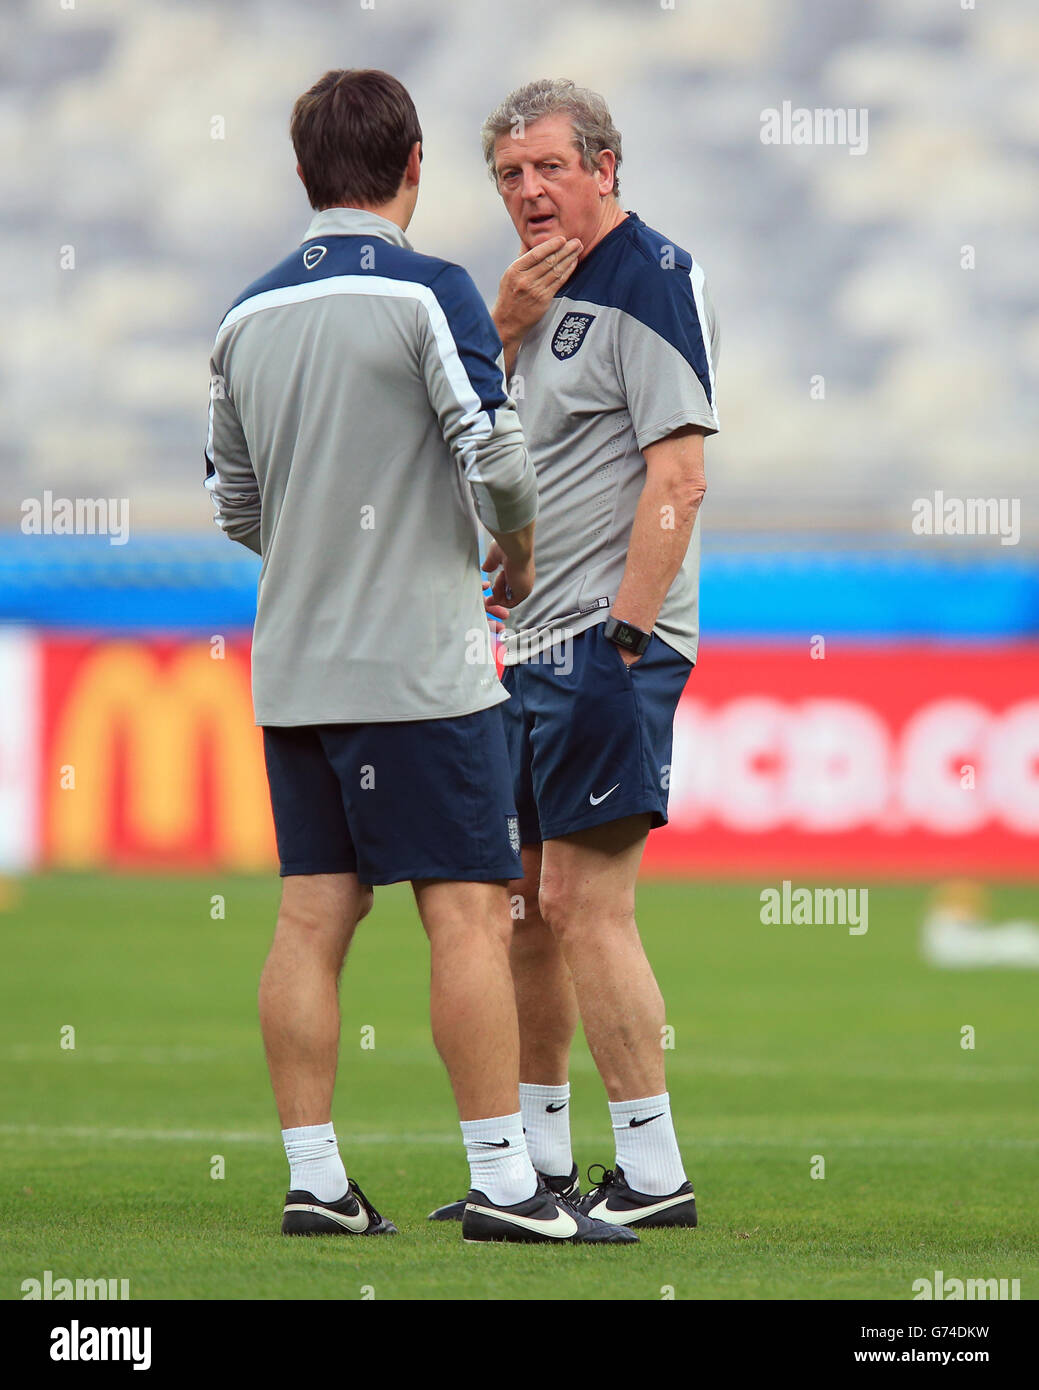 Soccer - FIFA World Cup 2014 - Group D - Costa Rica v England - Day Three - England Training and Press Conference - Estadio M.... England manager Roy Hodgson chats with Gary Neville during a training session at the Estadio Mineirao, Belo Horizonte, Brazil. Stock Photo